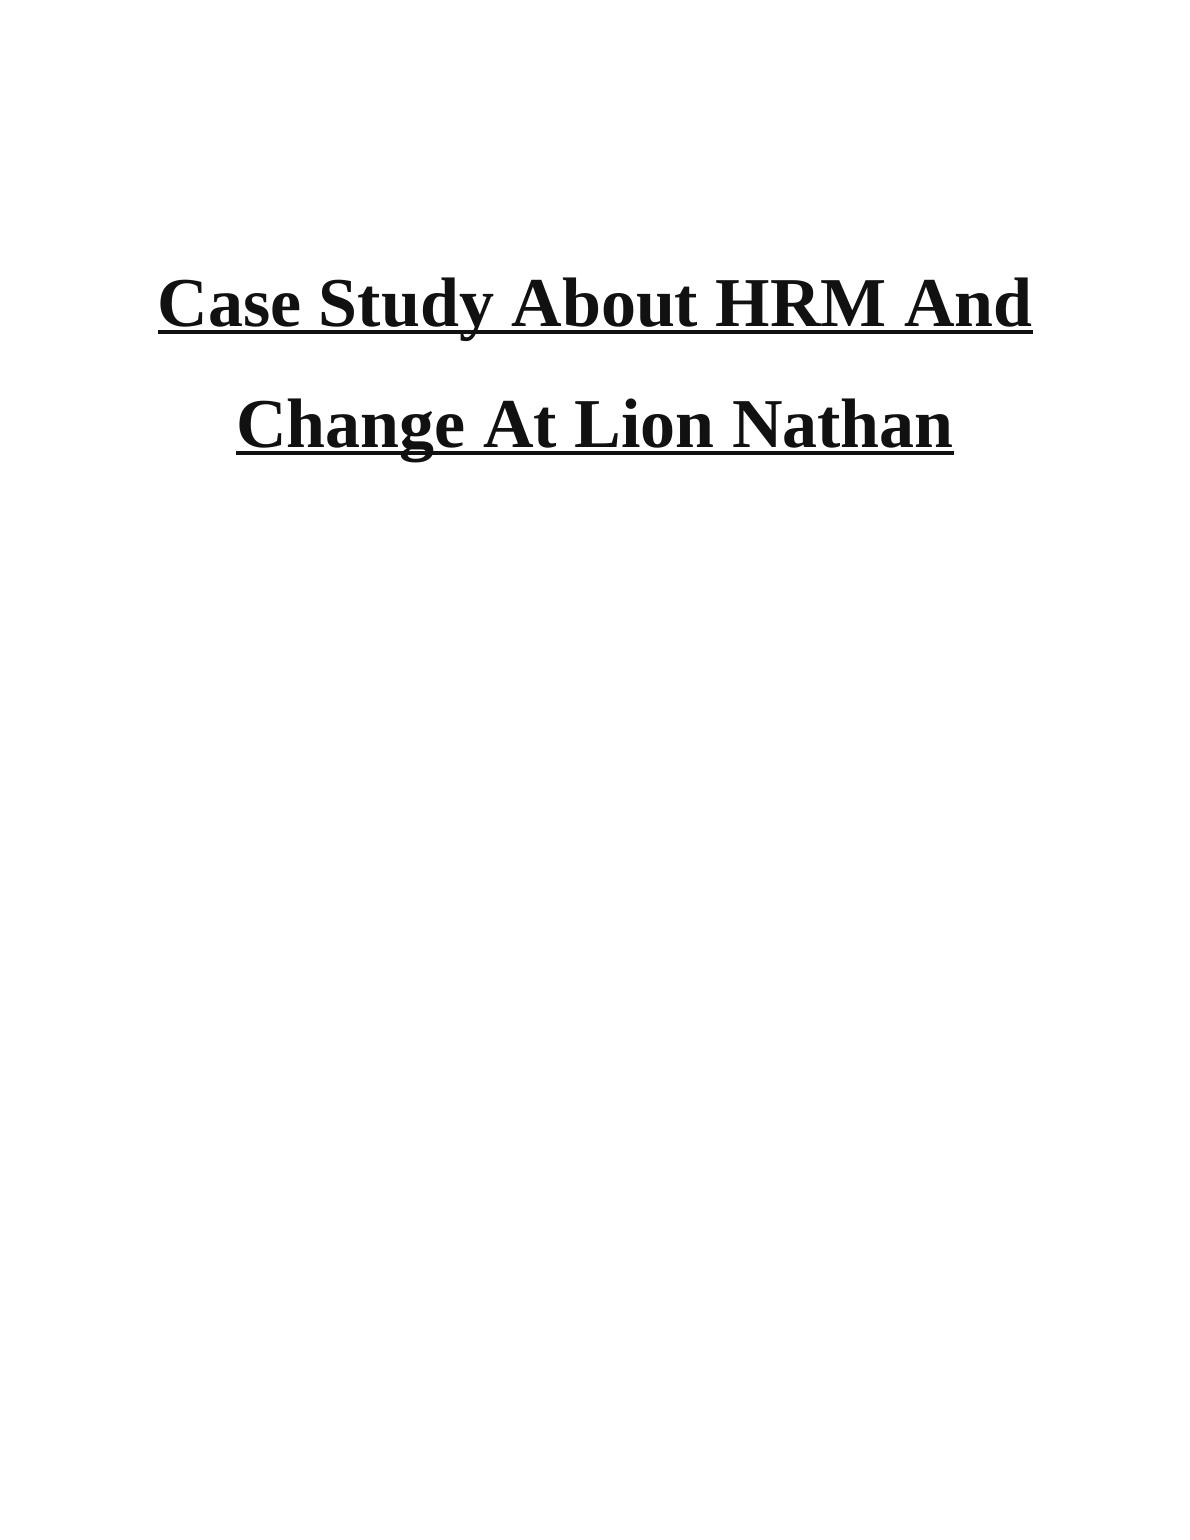 HRM And Change At Lion Nathan_1